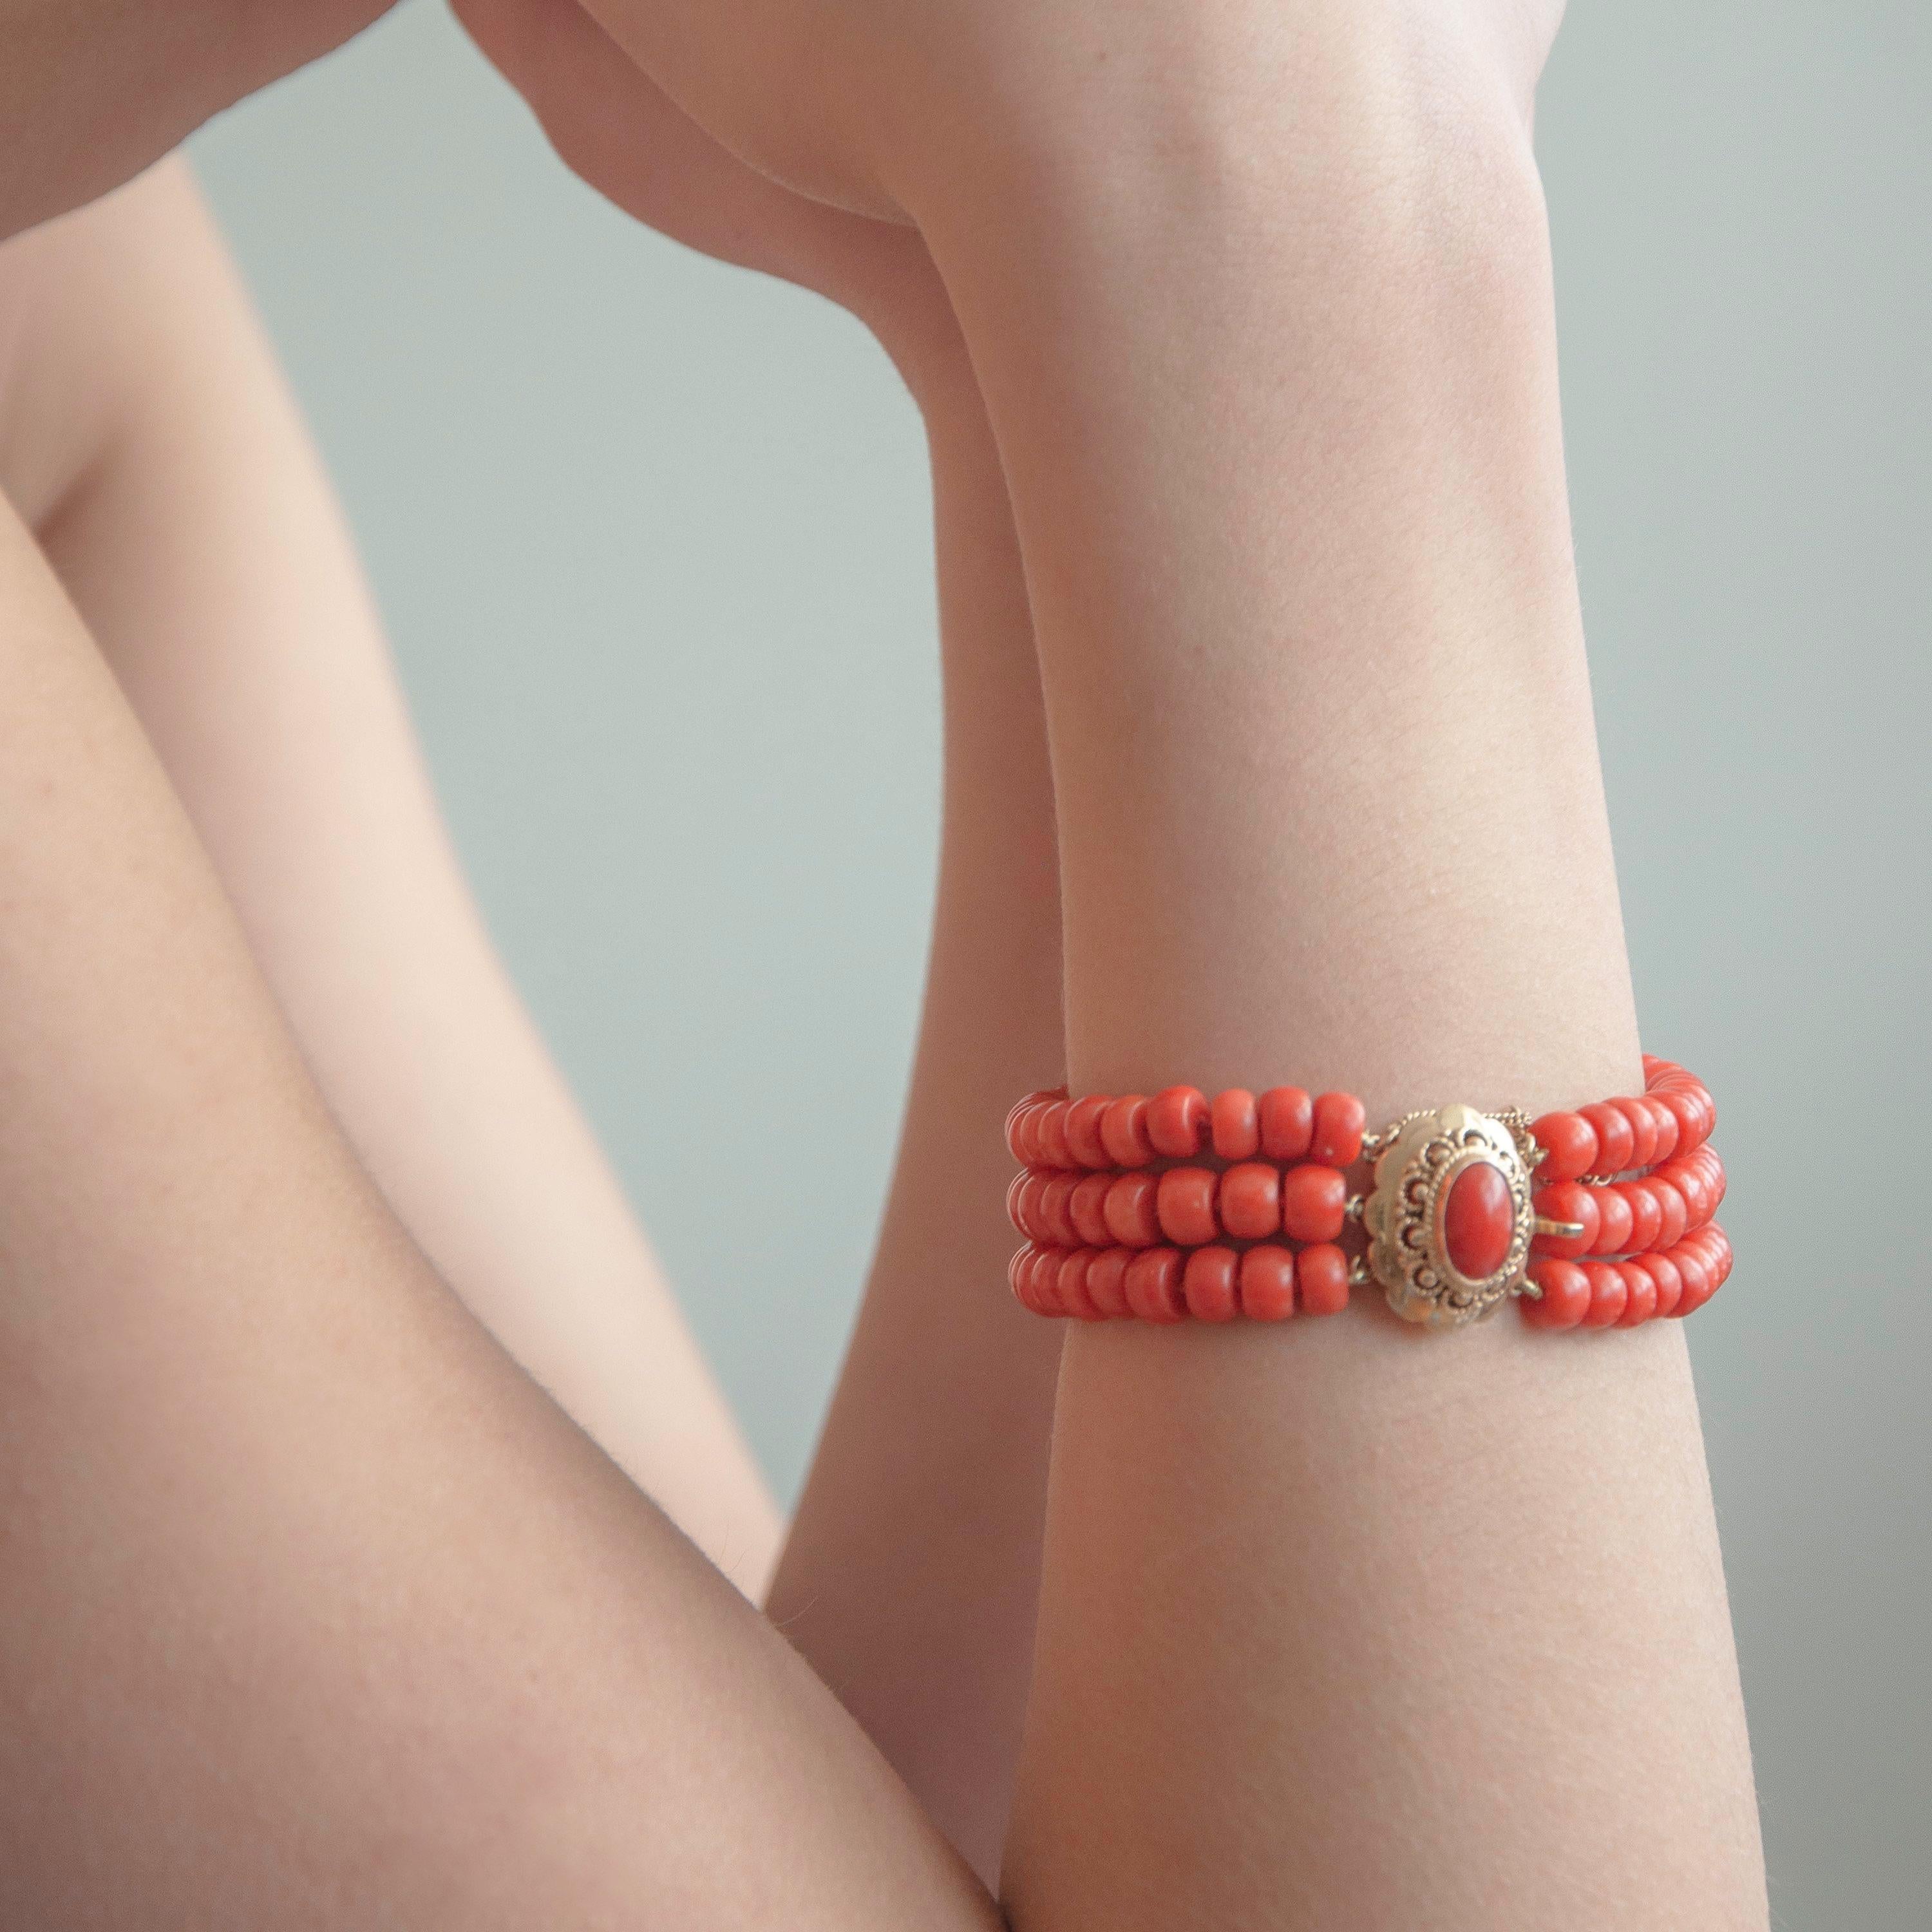 A natural red coral multi-strand beaded bracelet made with a 14 karat gold cannetille clasp. The bracelet has barrel-shaped beads with a diameter of approximately 6 millimeters each, which are in great condition. The cannetille work clasp is